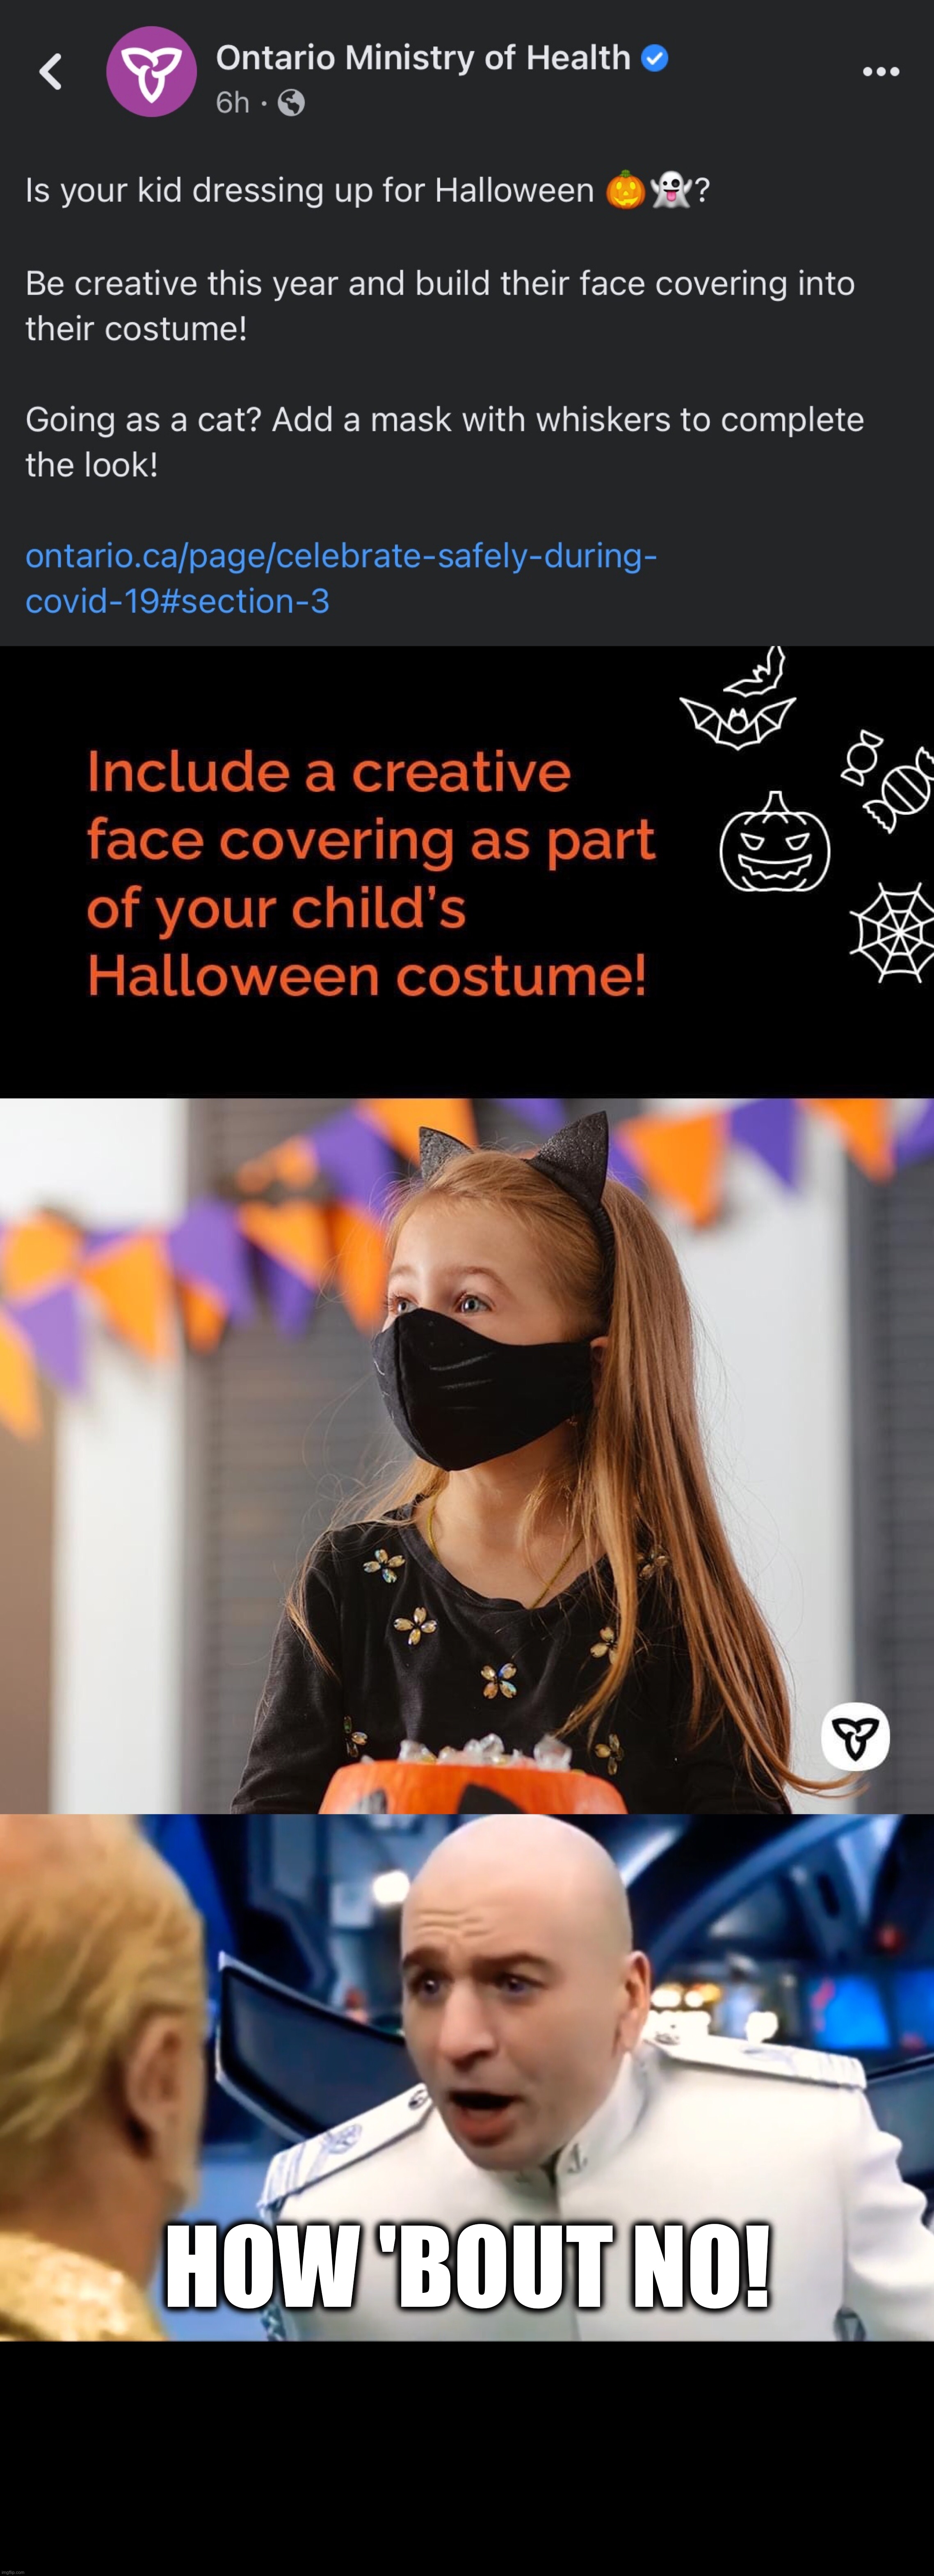 HOW 'BOUT NO! | image tagged in masks,china virus,tyranny,covid-19,halloween,how about no | made w/ Imgflip meme maker